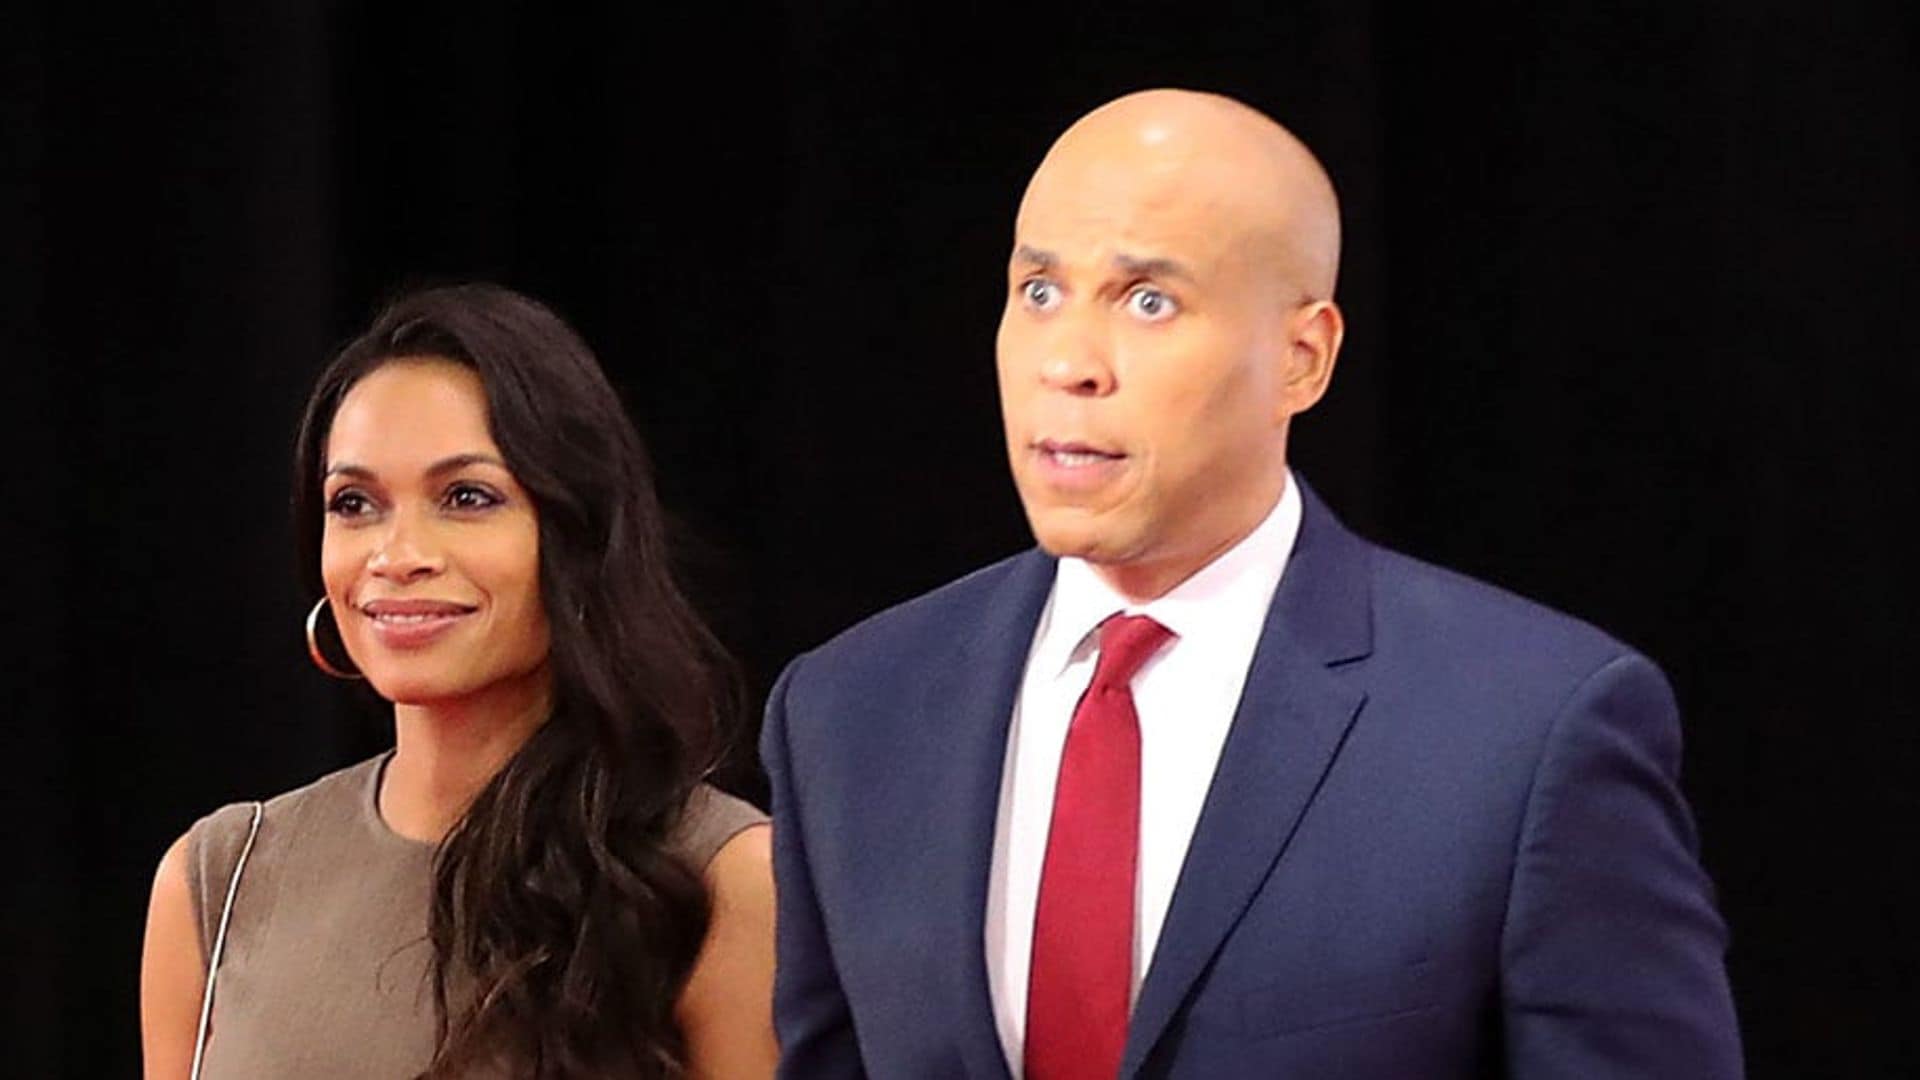 Rosario Dawson is in First Lady mode as she attends her first debate with Cory Booker